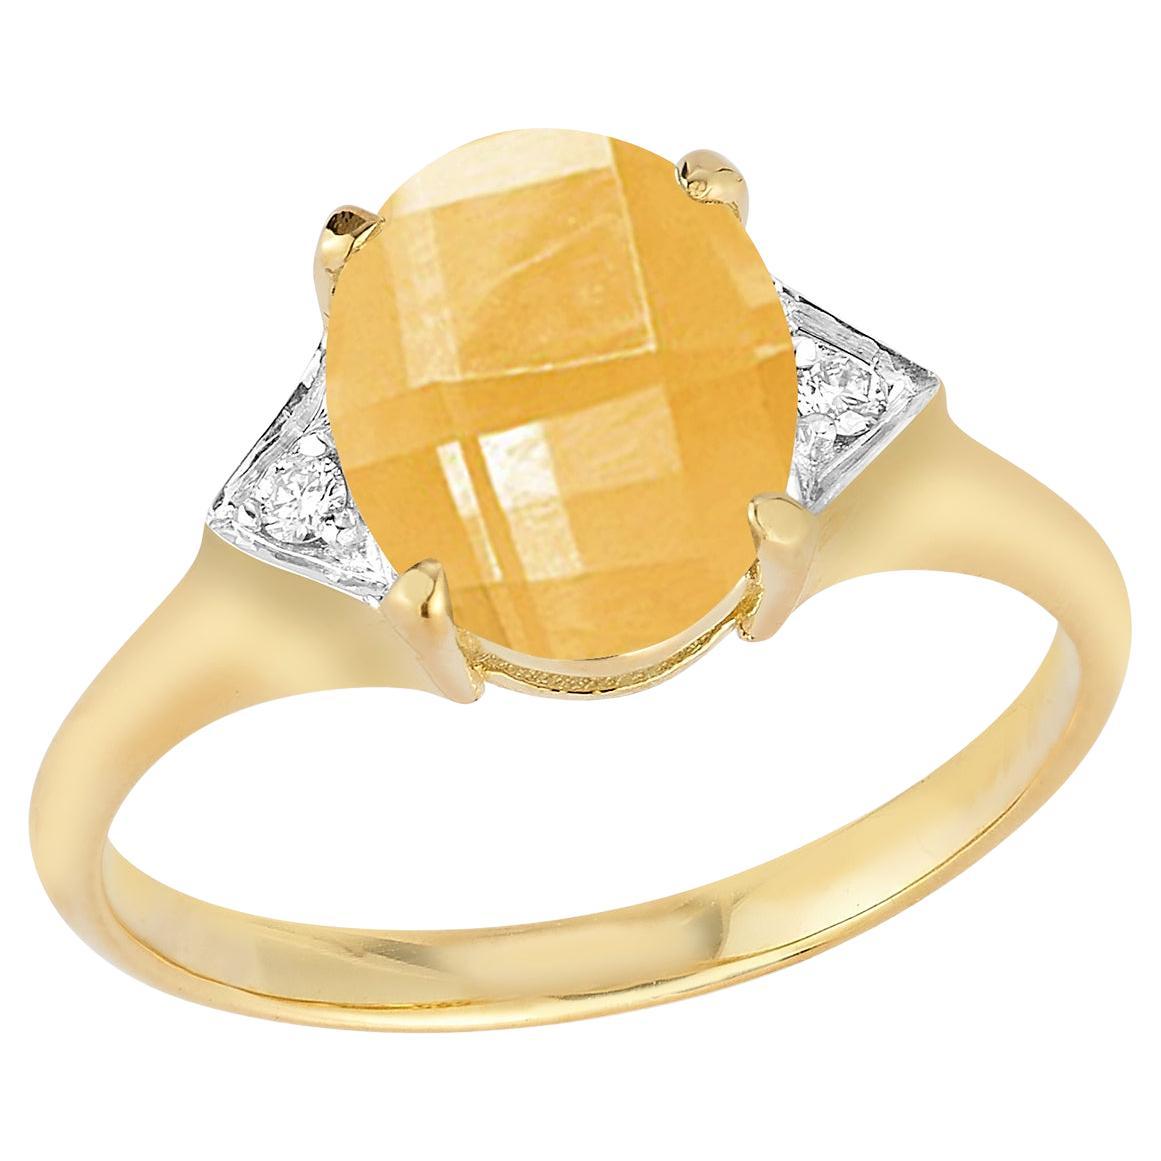 Hand-Crafted 14K Yellow Gold 0.05 ct. tw. Diamond & 4.75CT Citrine Cocktail Ring